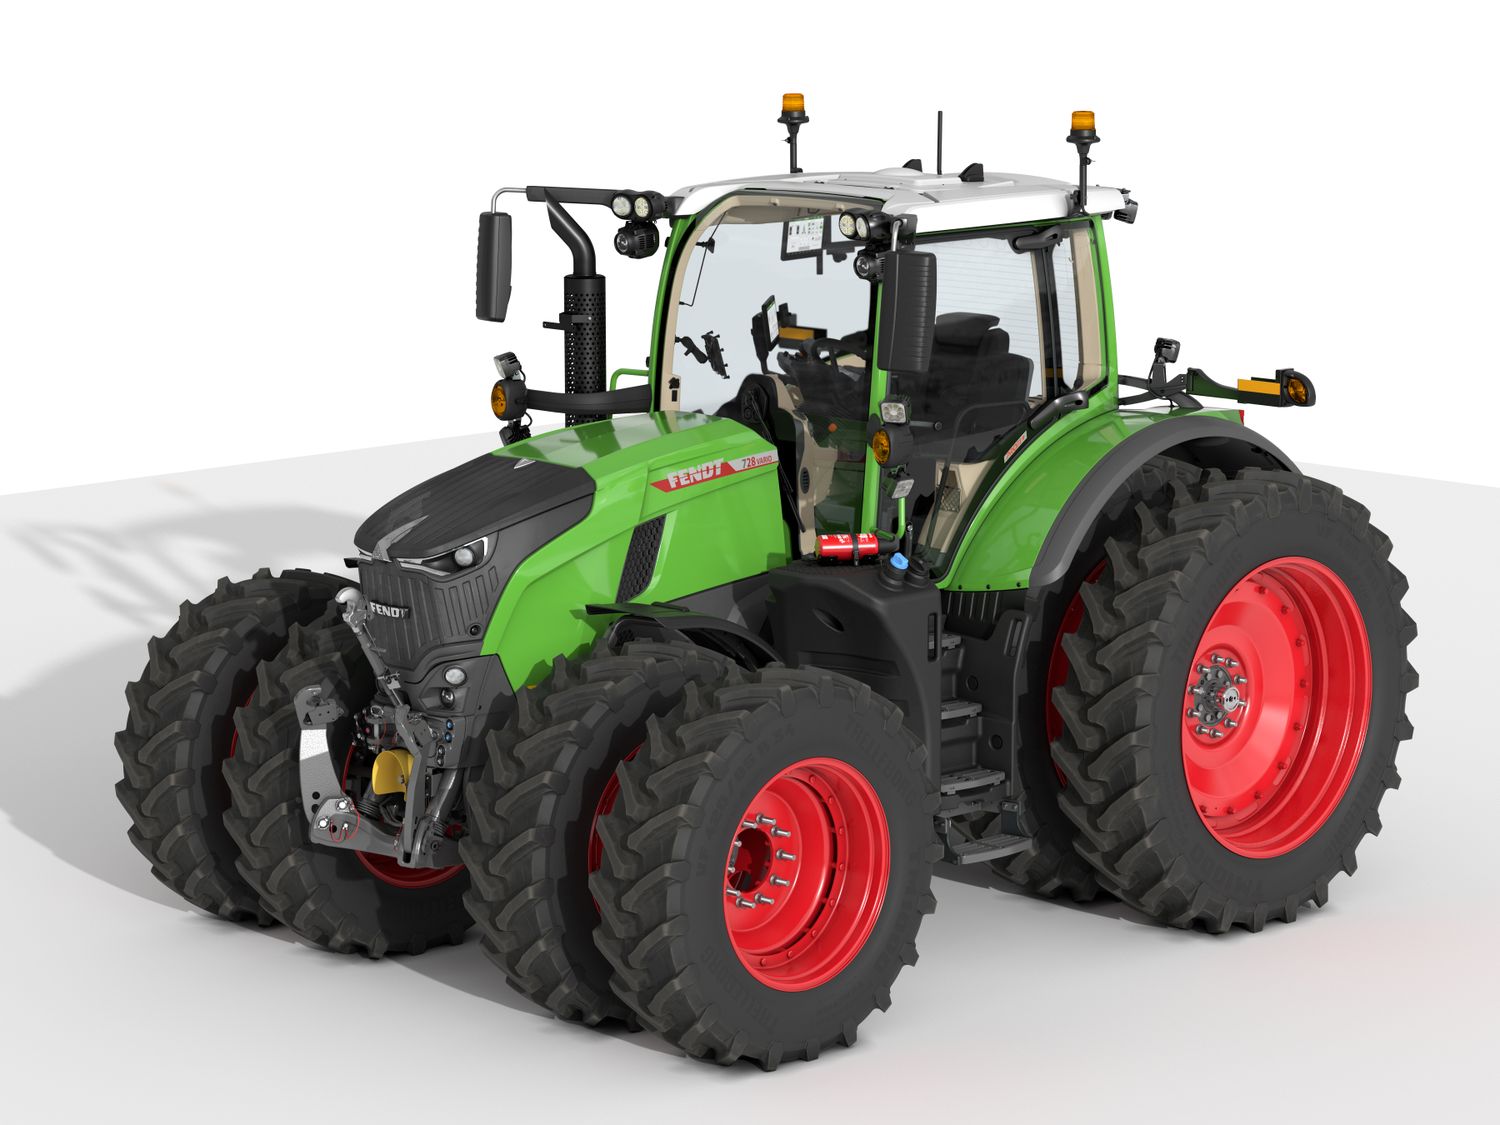 AGCO's Fendt Launches the New 700 Vario Series